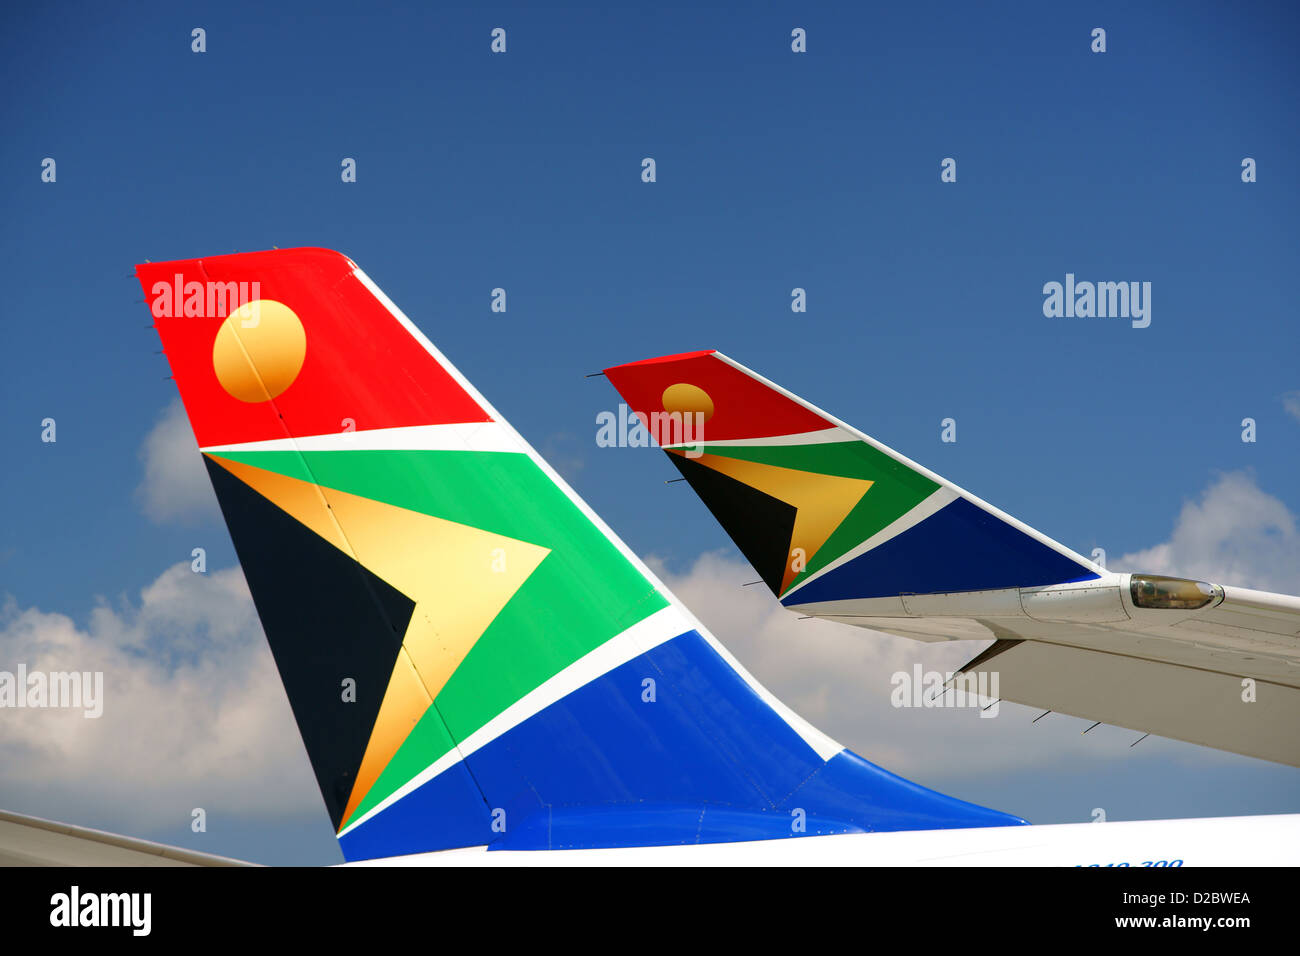 South African, A 340, wing, Airlines, Aircraft, Stock Photo